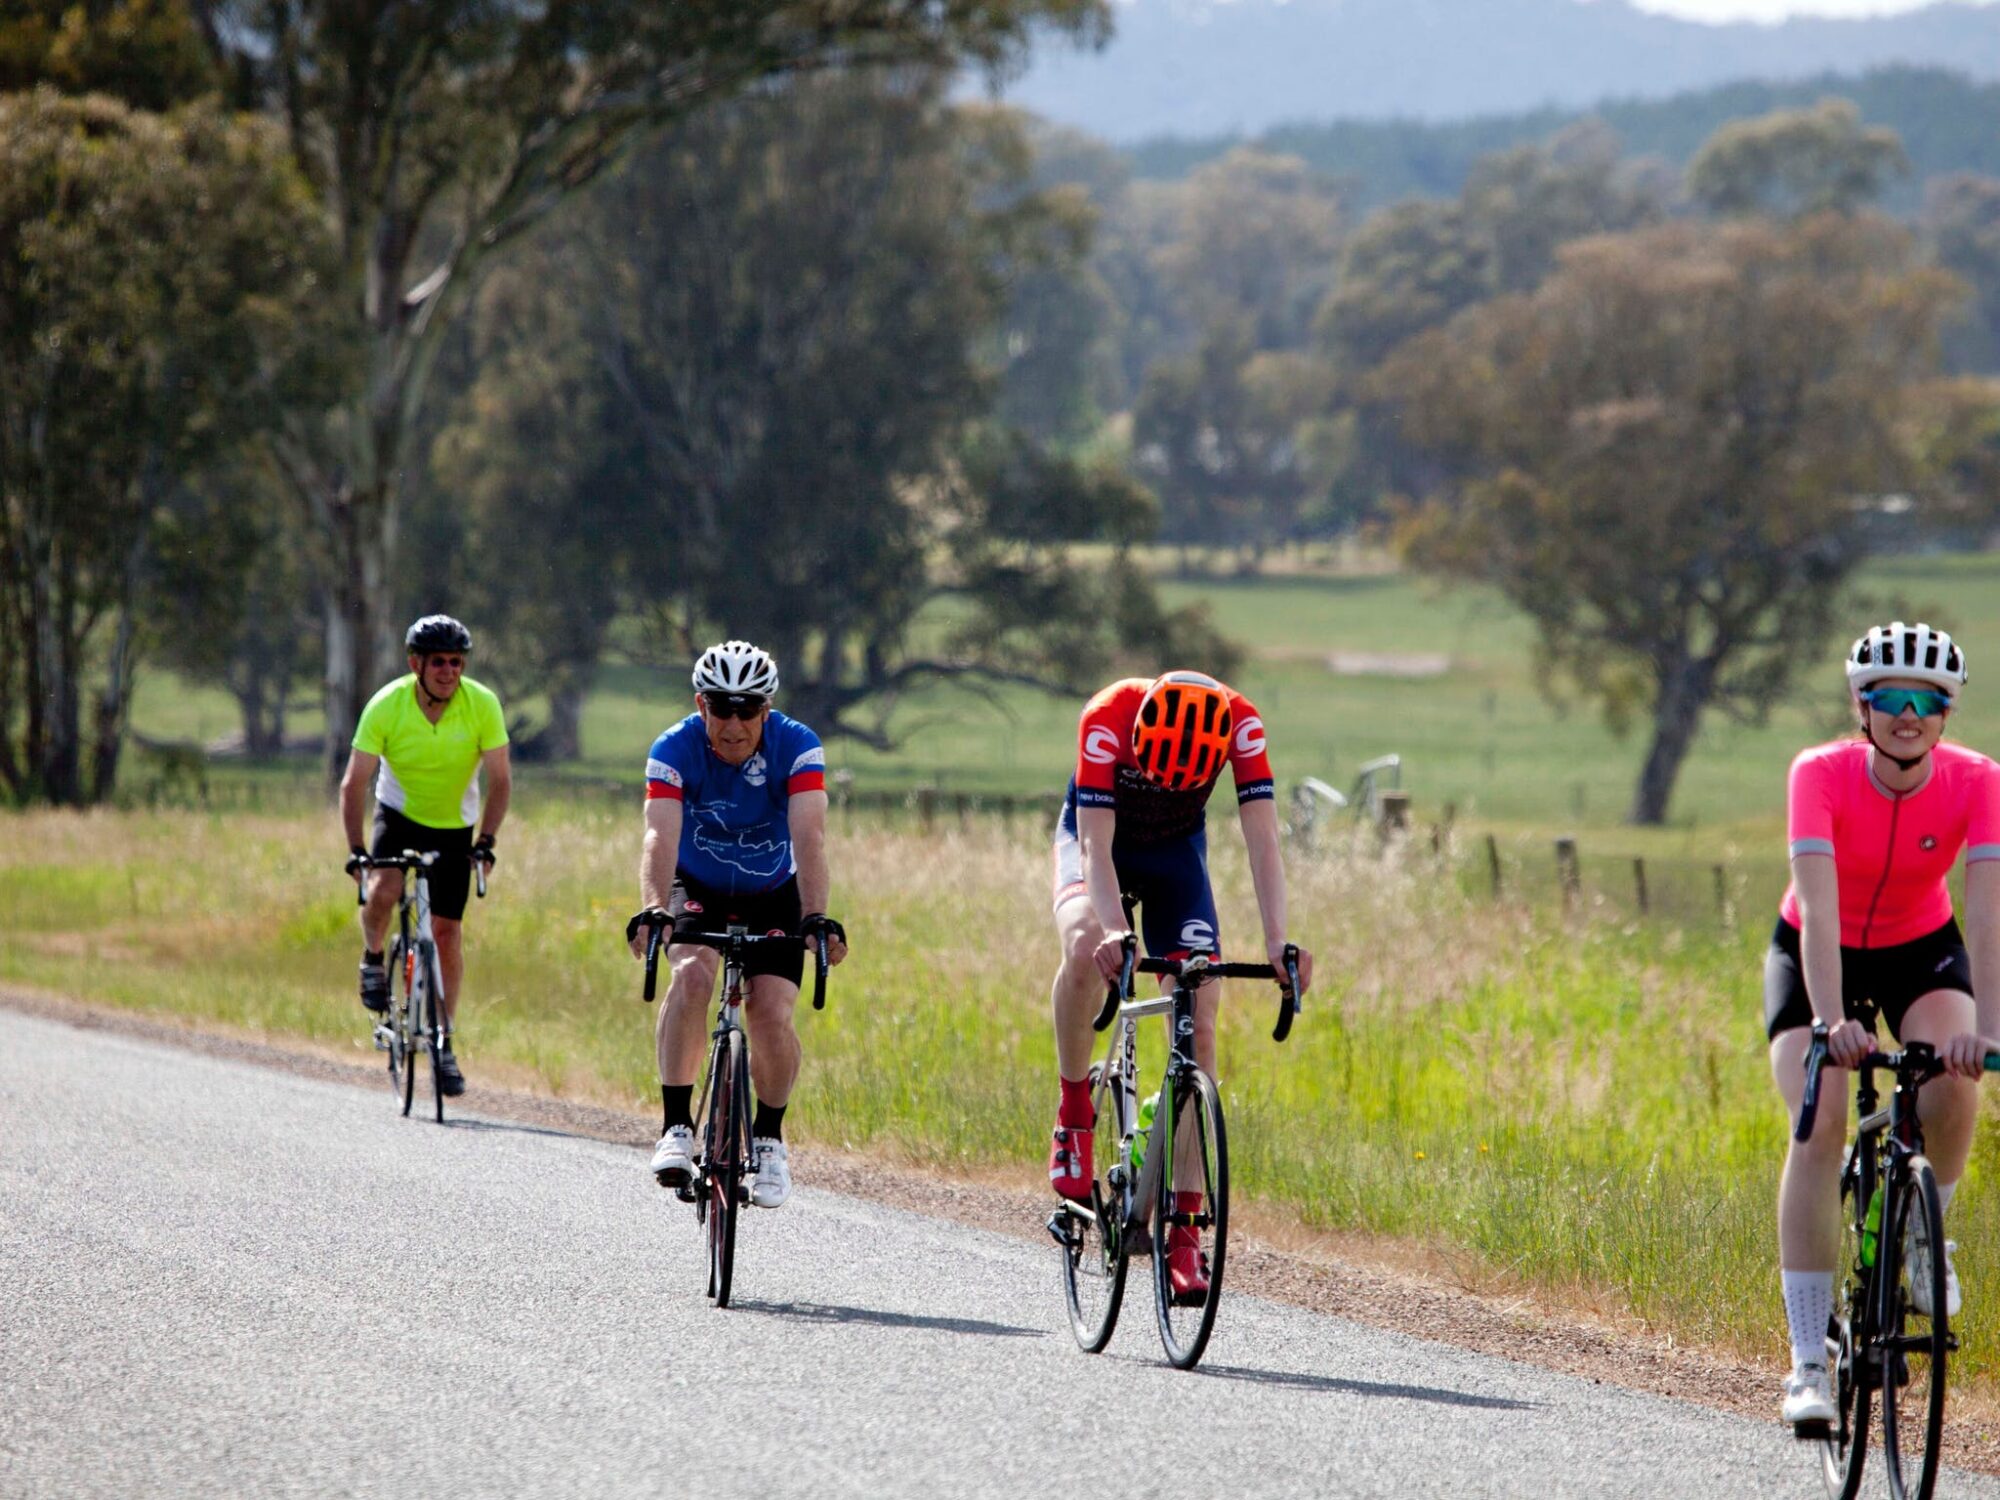 cyclists riding on the road farm land and hills in the background near glenrowan